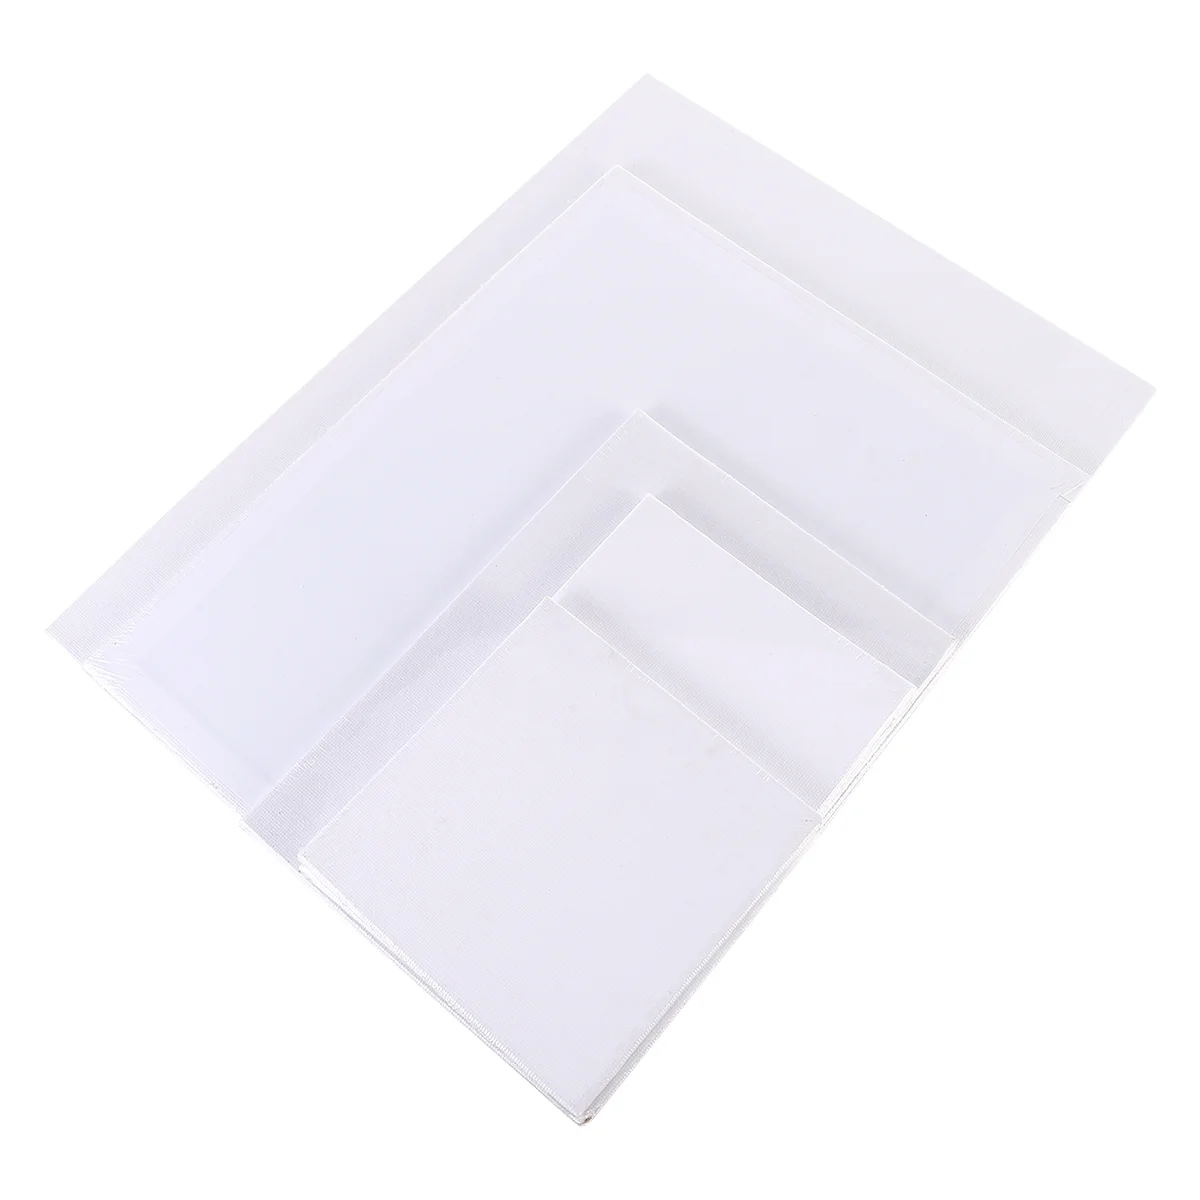 

10 Pcs Cotton Oil Painting Board Canvas Artist Drawing Boards Acrylic Tools Panels Chunk